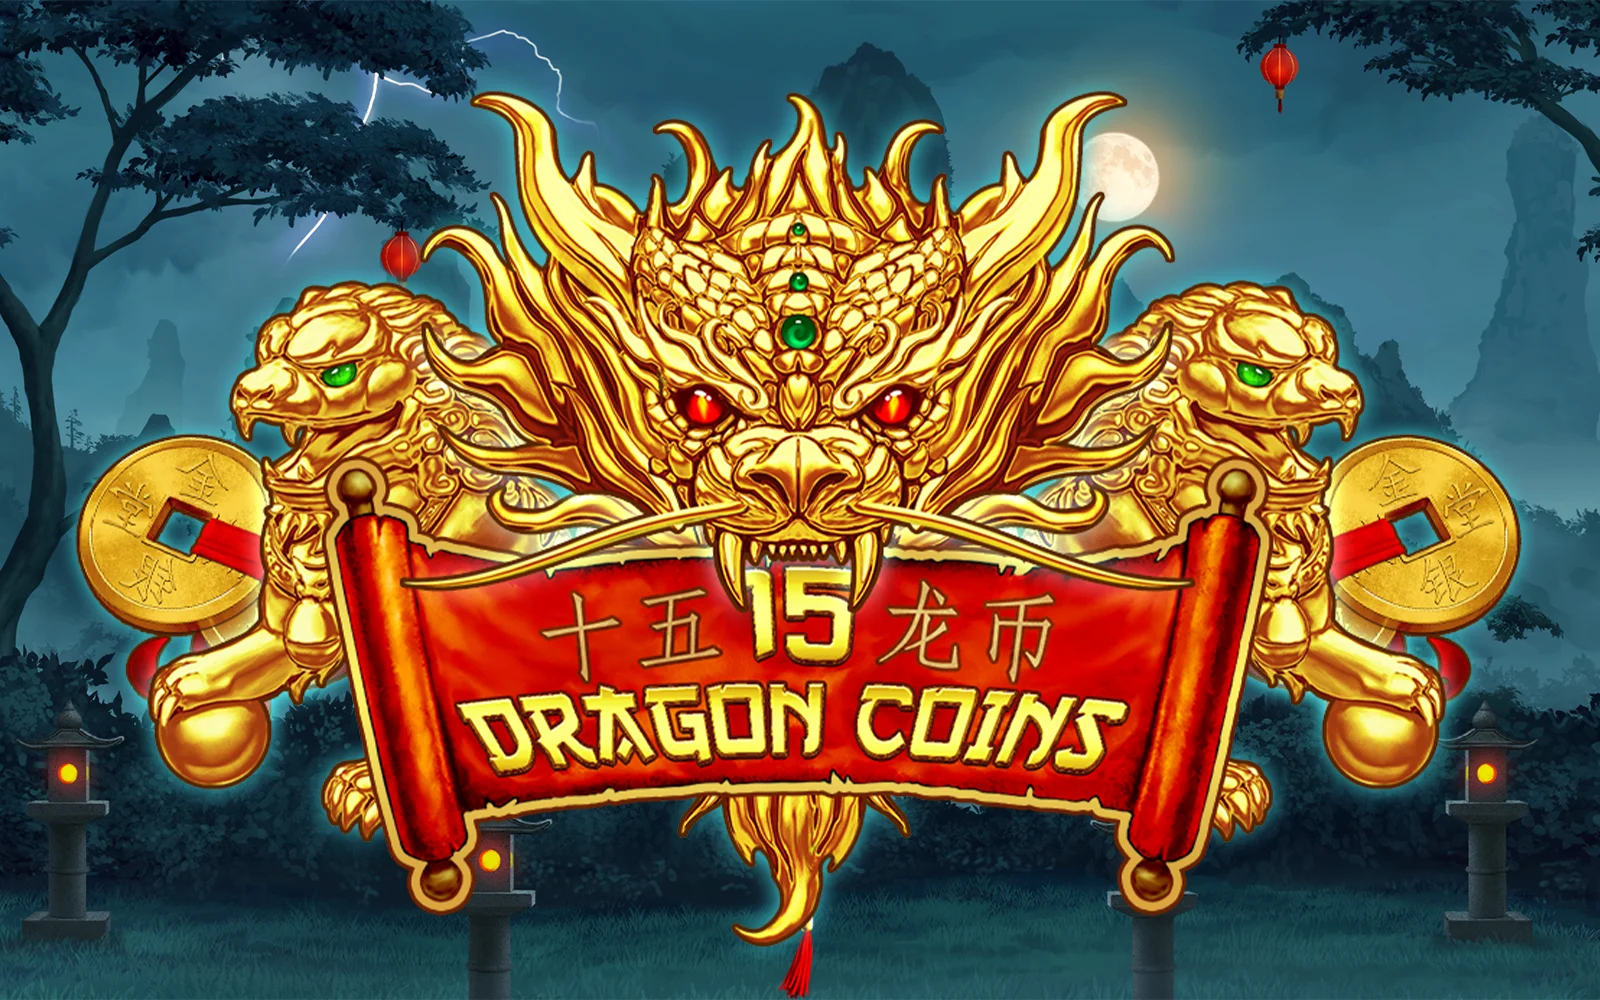 Play 15 Dragon Coins on Starcasino.be online casino